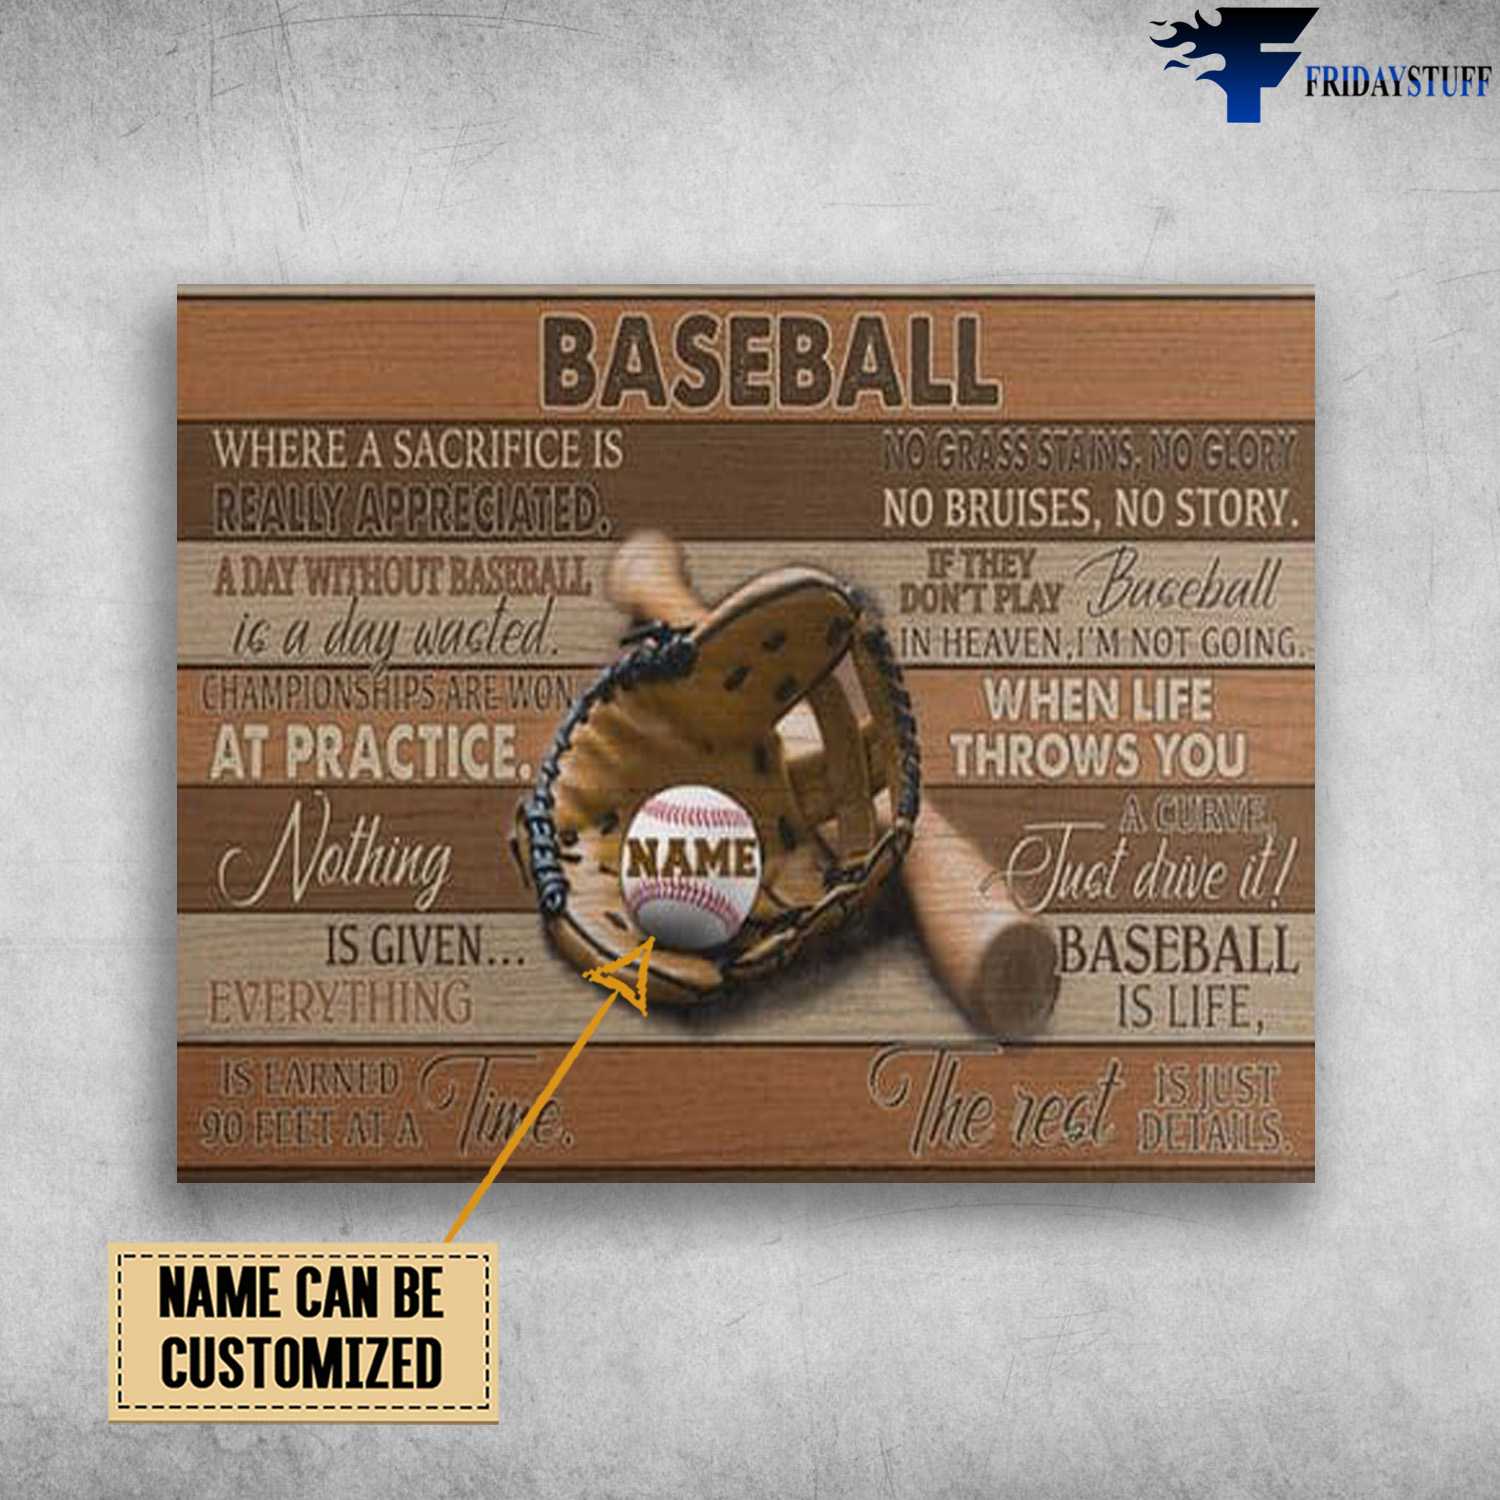 Baseball Poster, Where A Sactifice Is Really Appreciated, A Day Without Baseball Is A Day Wasted, Championships Are Won At Practice, Nothing Is Given, Everything Is Earned So Feet At A Time